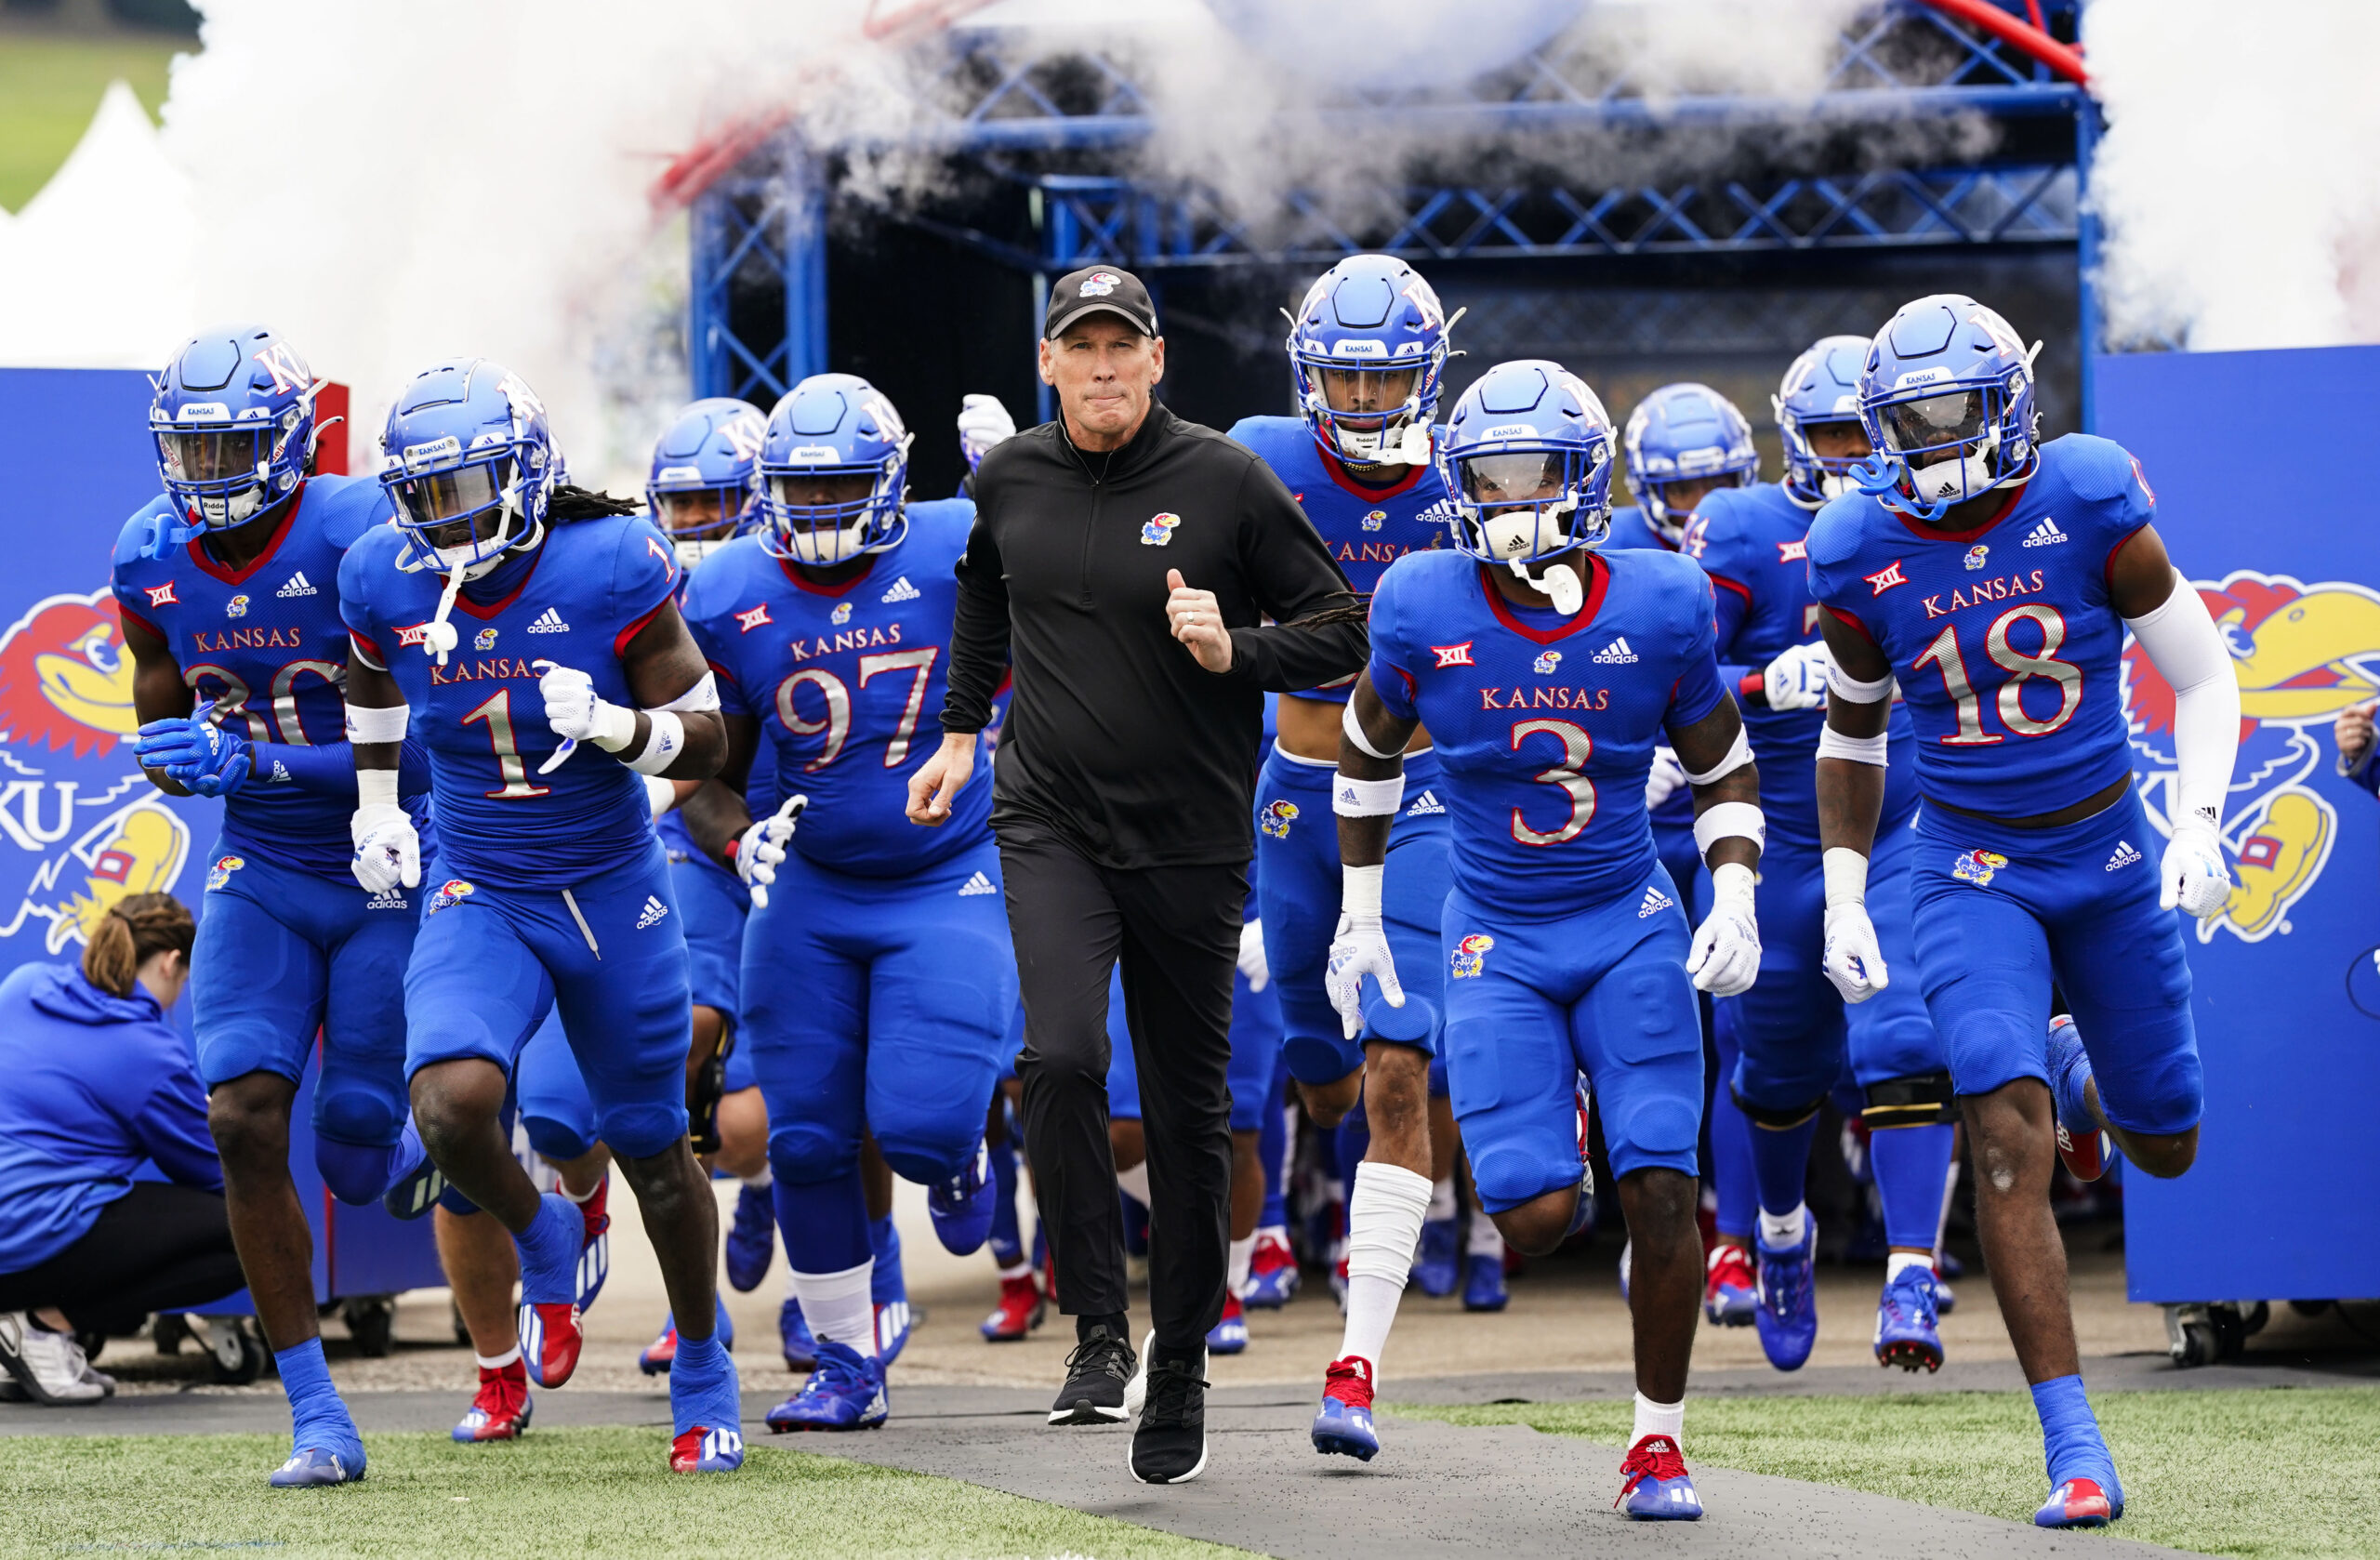 ‘Physical makeup of the team’: Kansas sports reporter on why Leipold’s Jayhawks are different